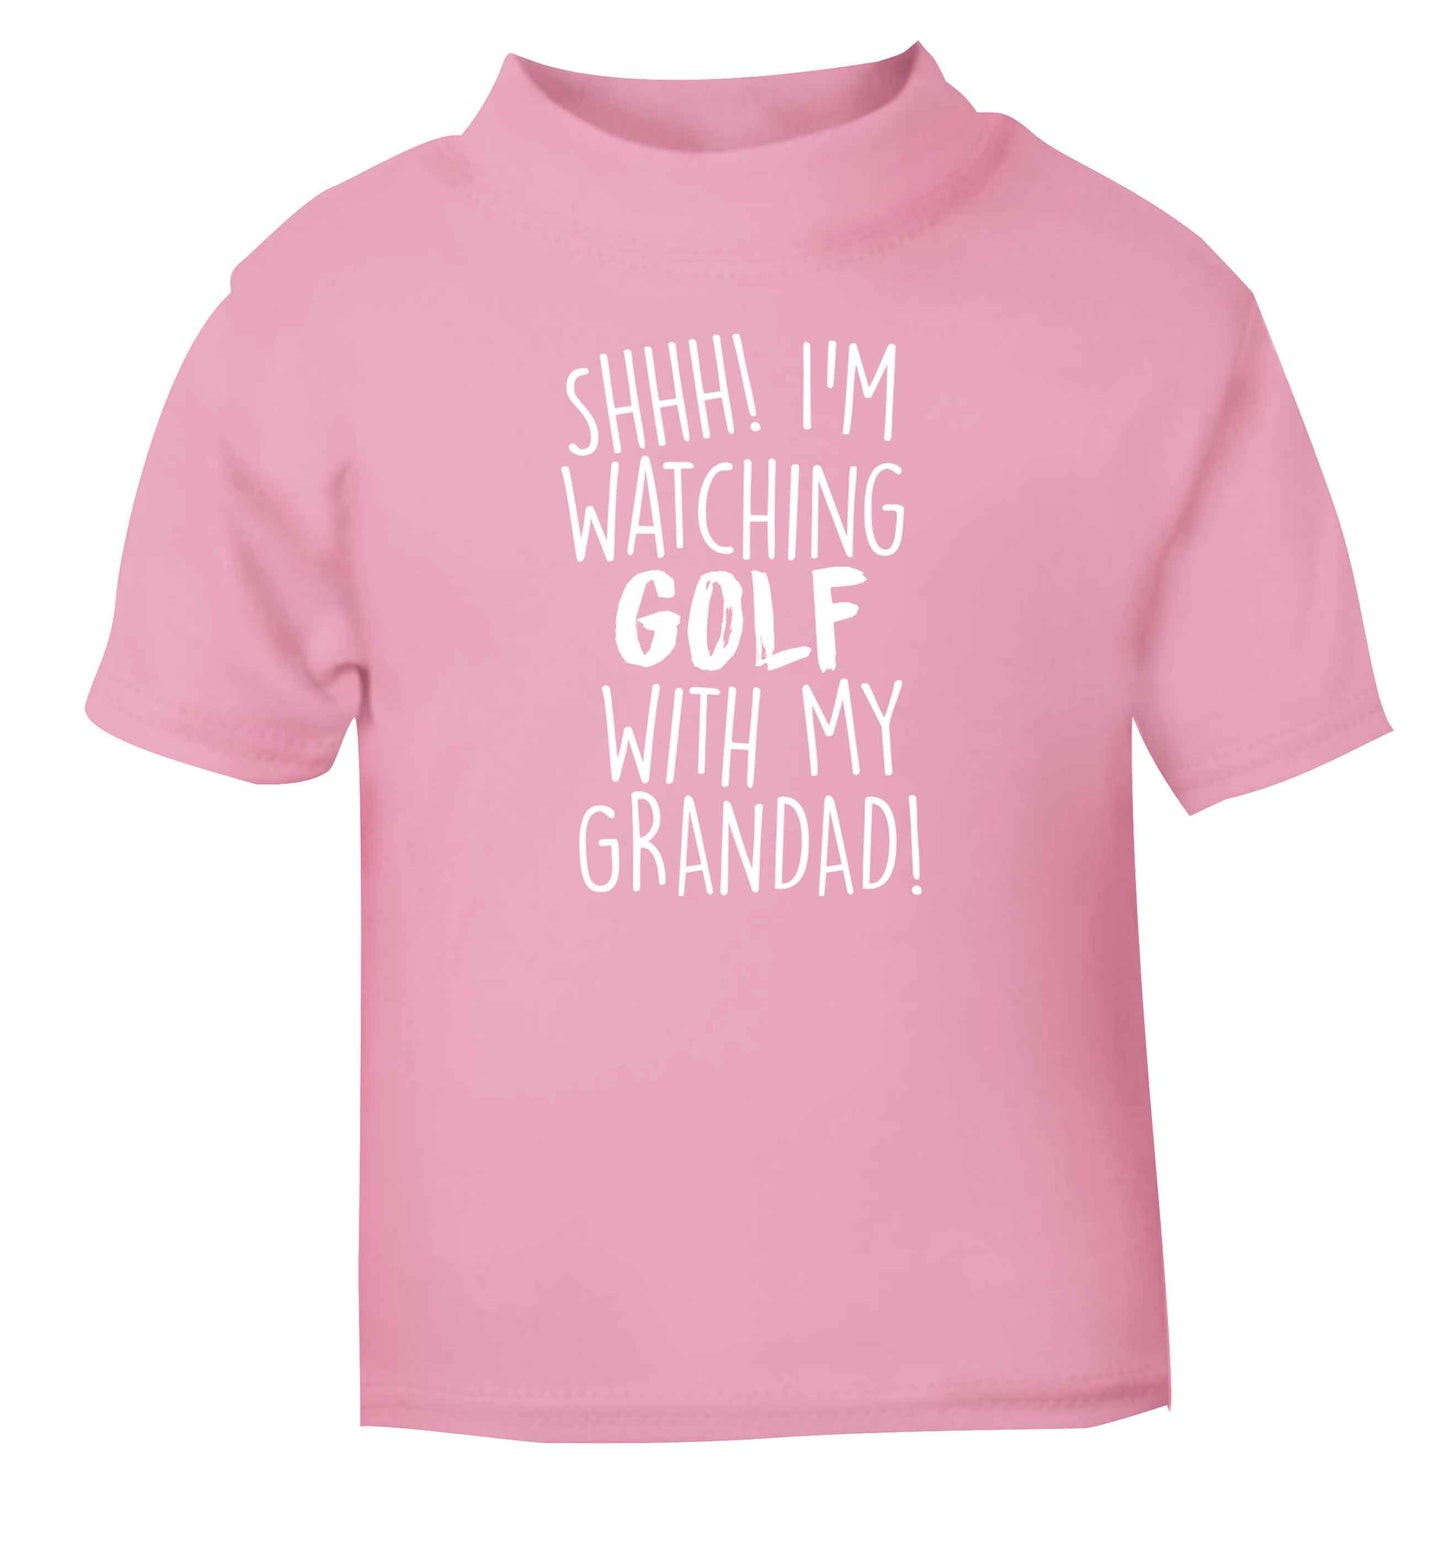 Shh I'm watching golf with my grandad light pink Baby Toddler Tshirt 2 Years